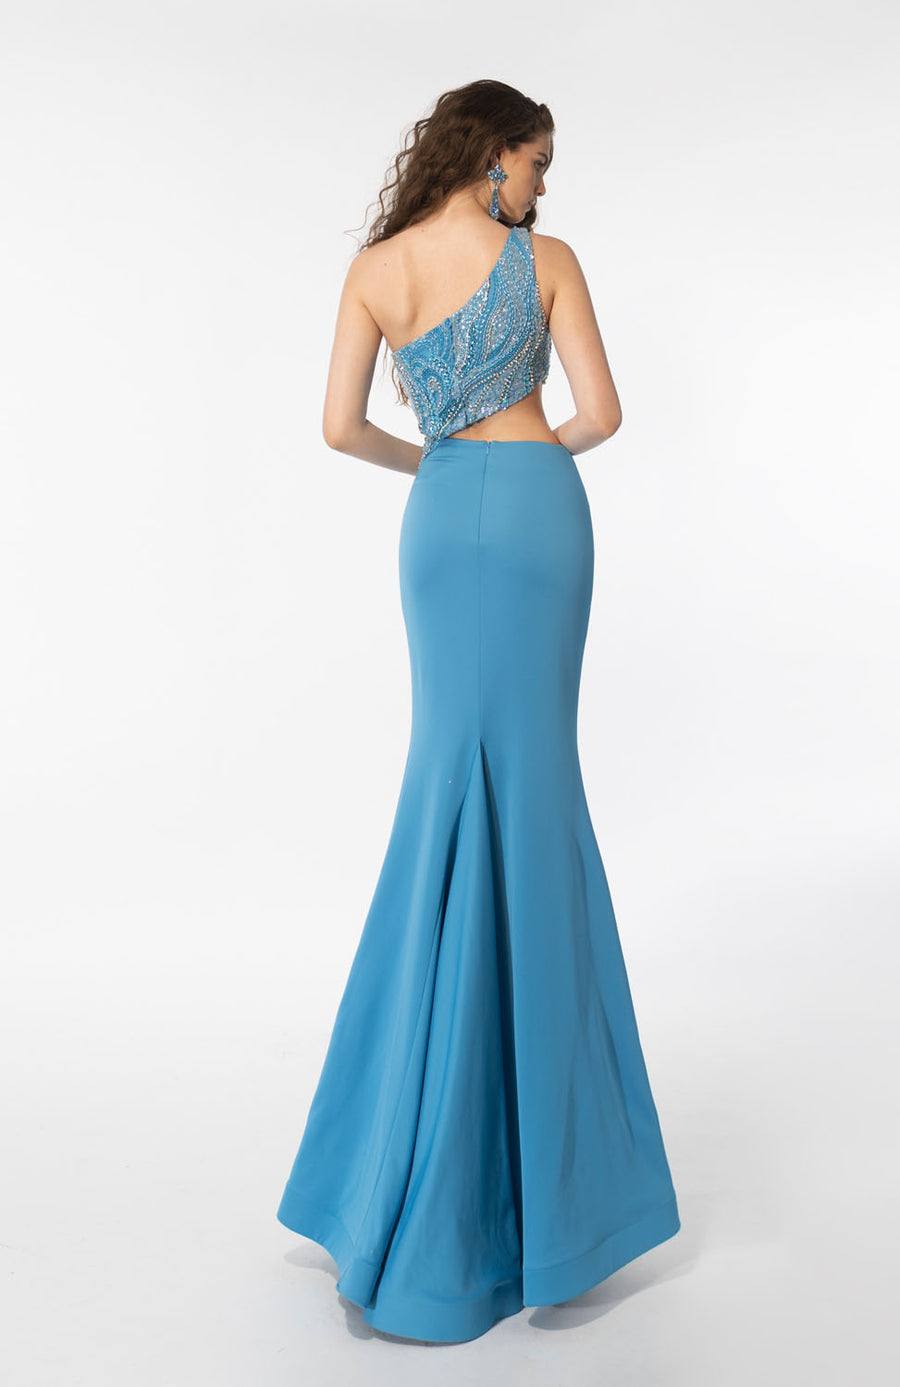 Ava Presley 39218 prom dress images.  Ava Presley 39218 is available in these colors: Royal, Turquoise.